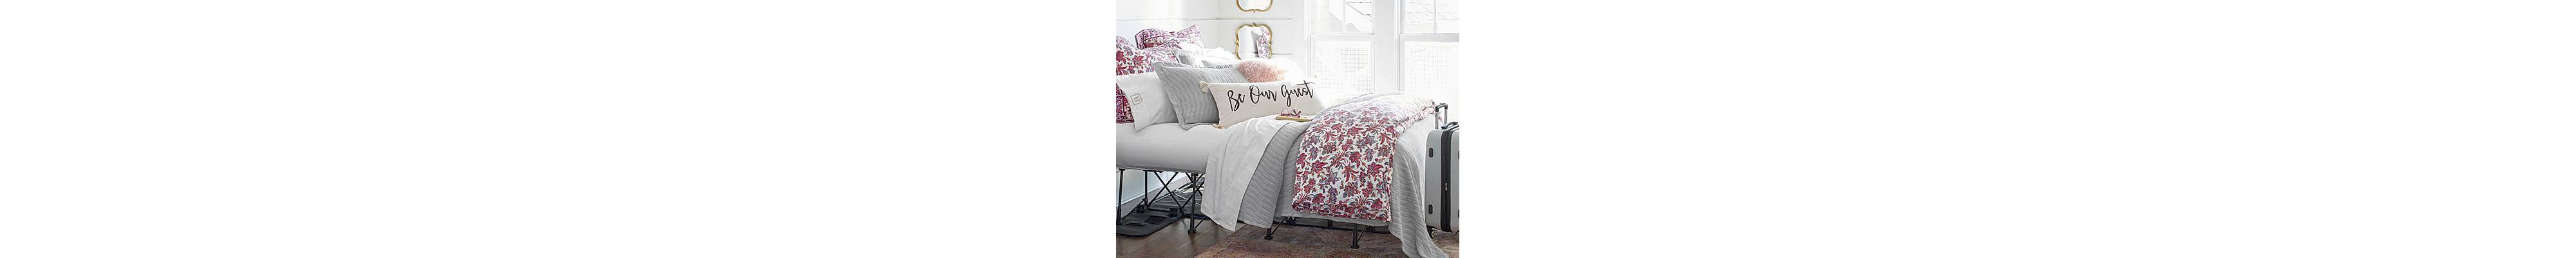 How To Layer Your Bed Our Best Bedscaping Tips Grandin Road Blog